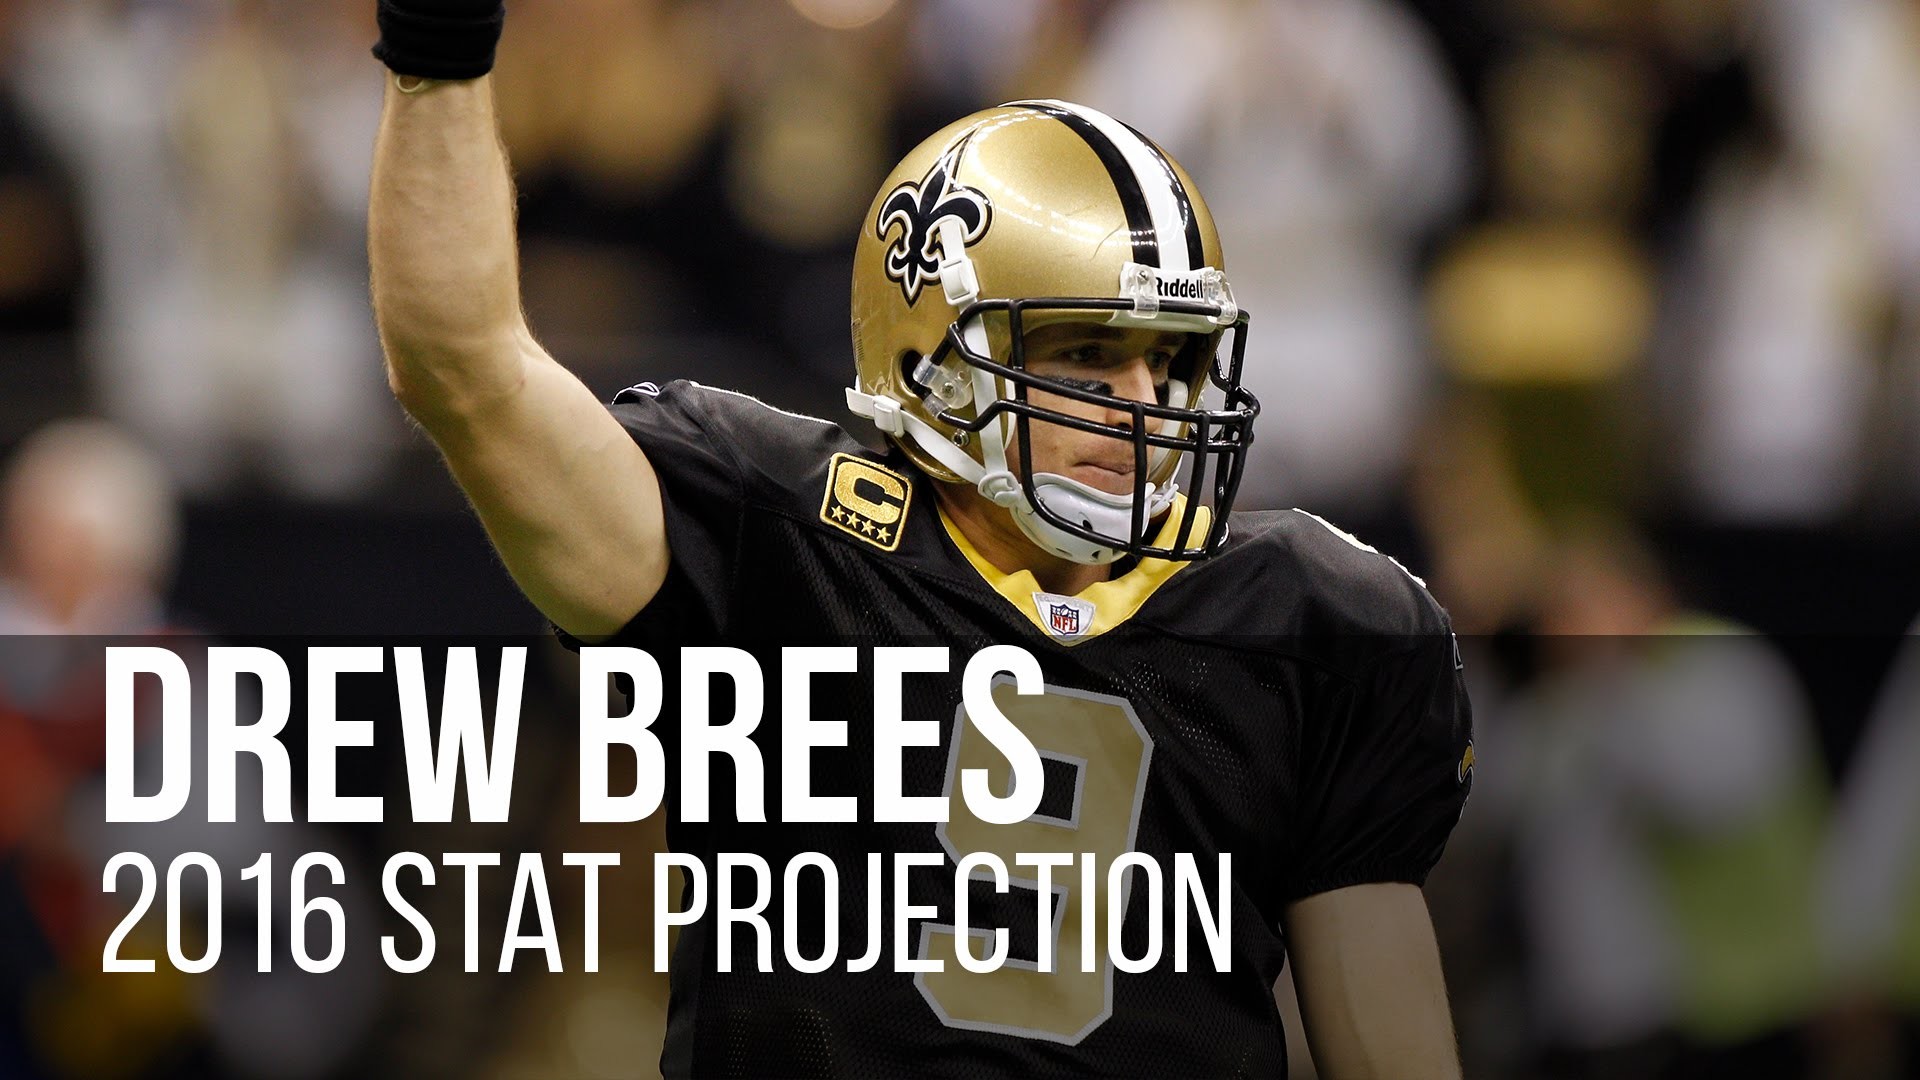 1920x1080 Drew Brees 2016 Stat Projection